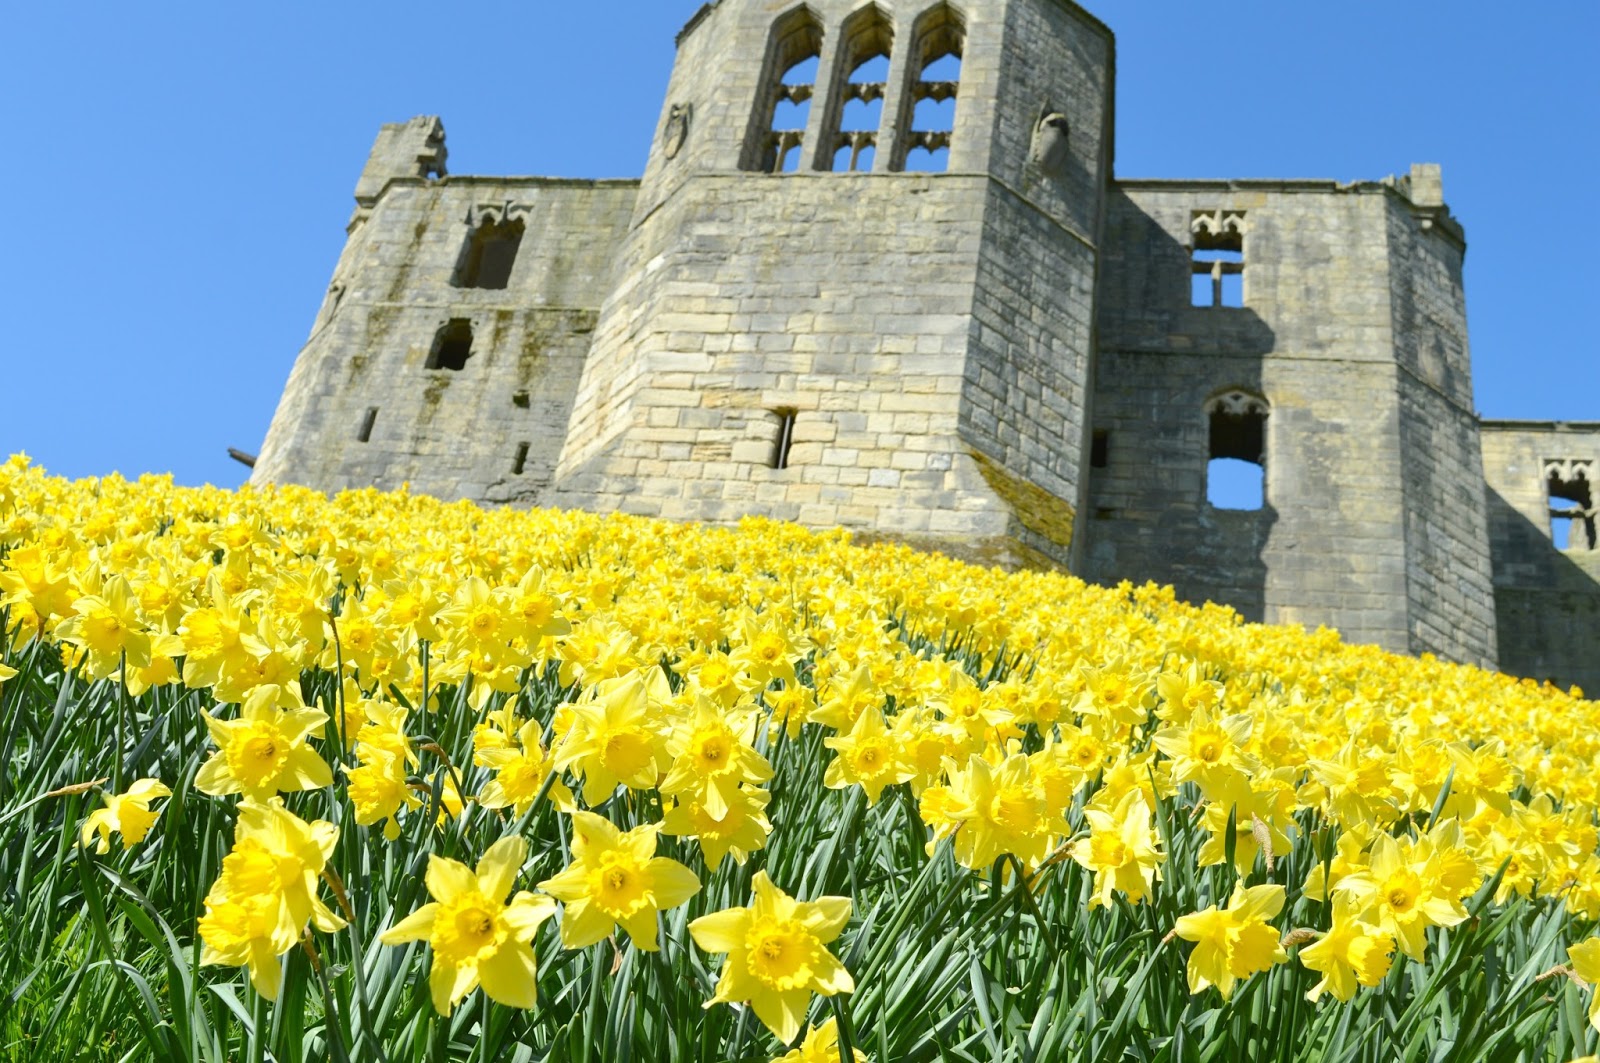 Daffodils at The Castle - A Day Trip to Warkworth, Northumberland